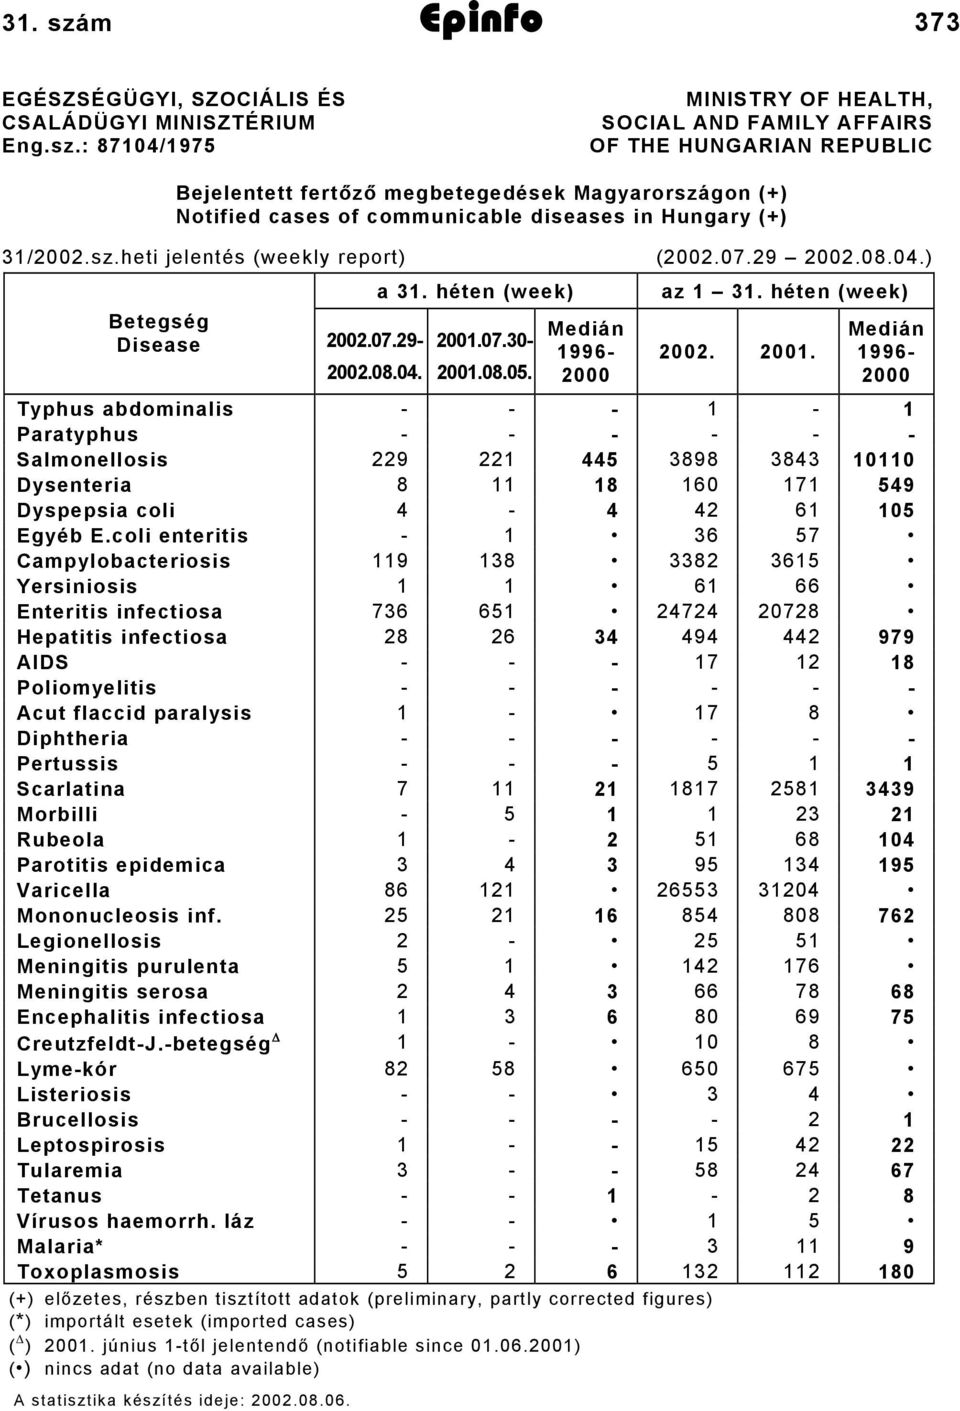 : 8714/1975 MINISTRY OF HEALTH, SOCIAL AND FAMILY AFFAIRS OF THE HUNGARIAN REPUBLIC Bejelentett fertőző megbetegedések Magyarországon (+) Notified cases of communicable diseases in Hungary (+) 31/22.